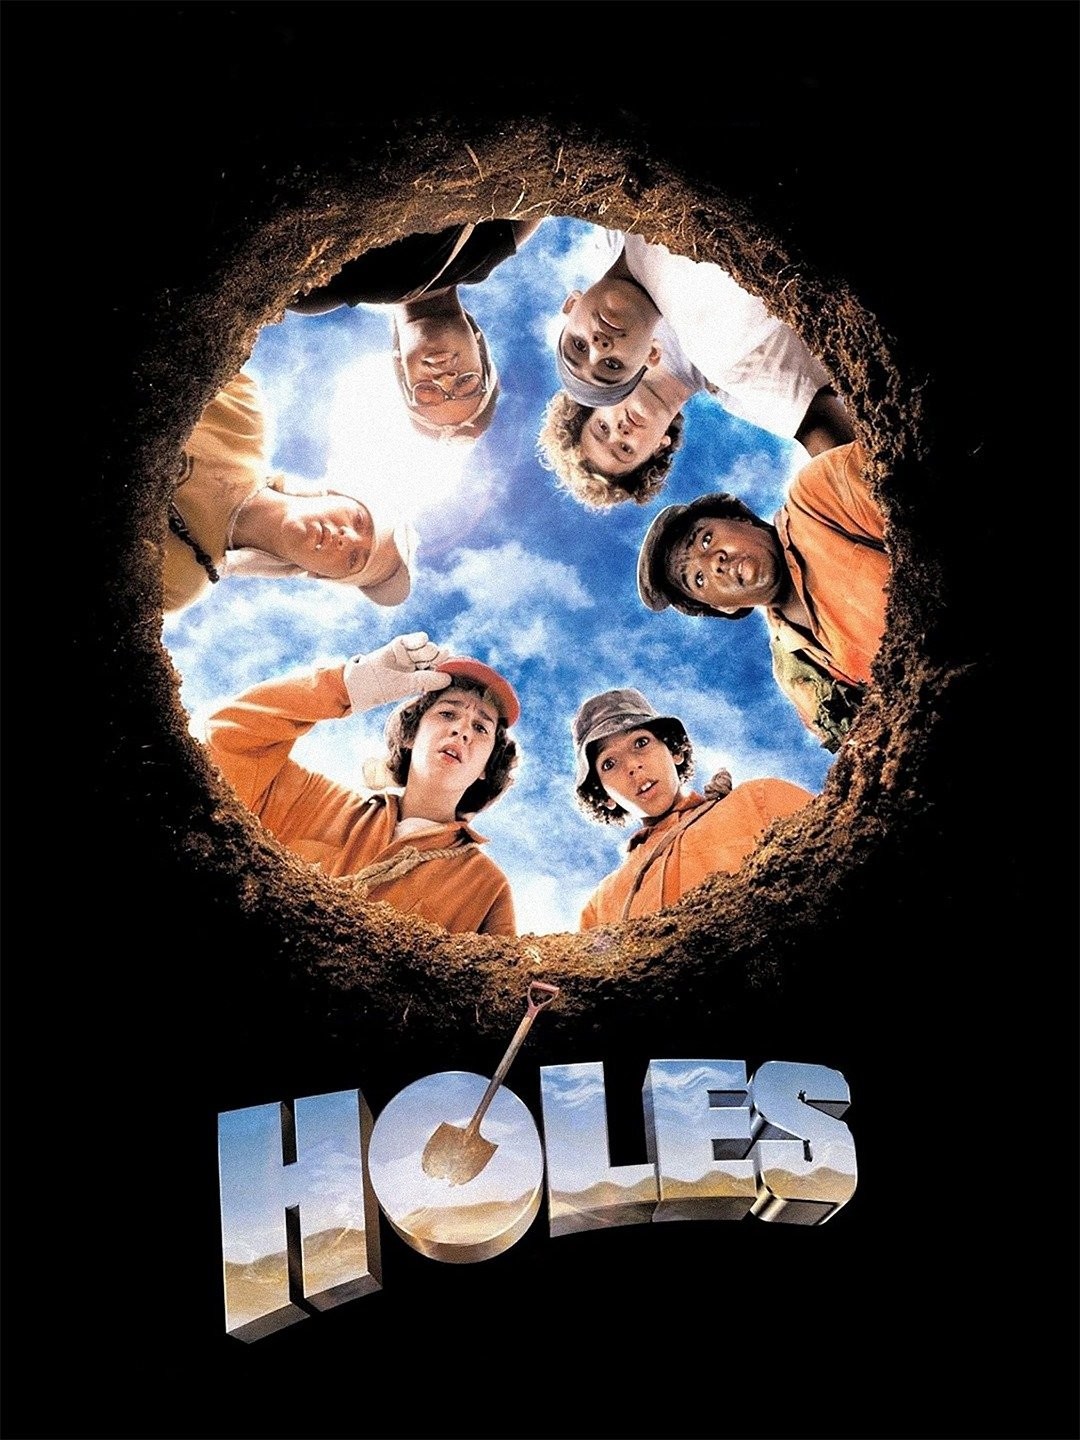 Holes - Movie Review - The Austin Chronicle